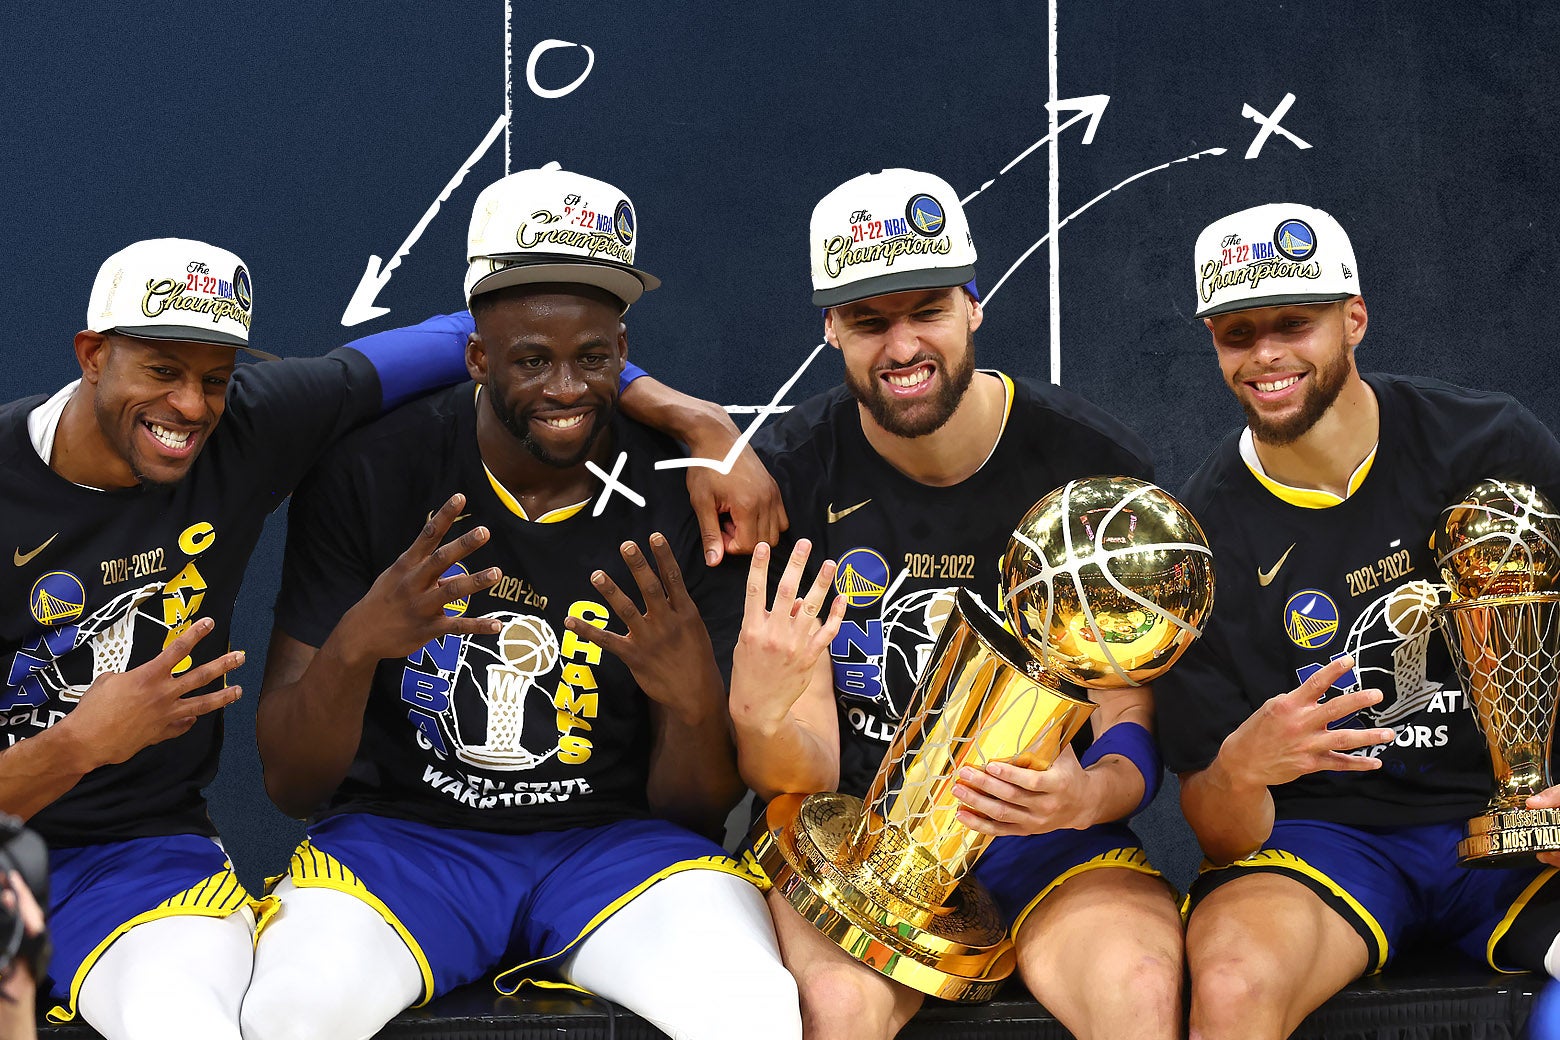 Andre Iguodala, Draymond Green, Klay Thompson, and Steph Curry seated and all holding up four fingers to celebrate their fourth NBA title, smiling and wearing their championship caps and T-shirts, Klay holding the Larry O'Brien trophy and Steph holding his Finals MVP trophy, with an X-es, Os, and arrows basketball play illustrated behind them